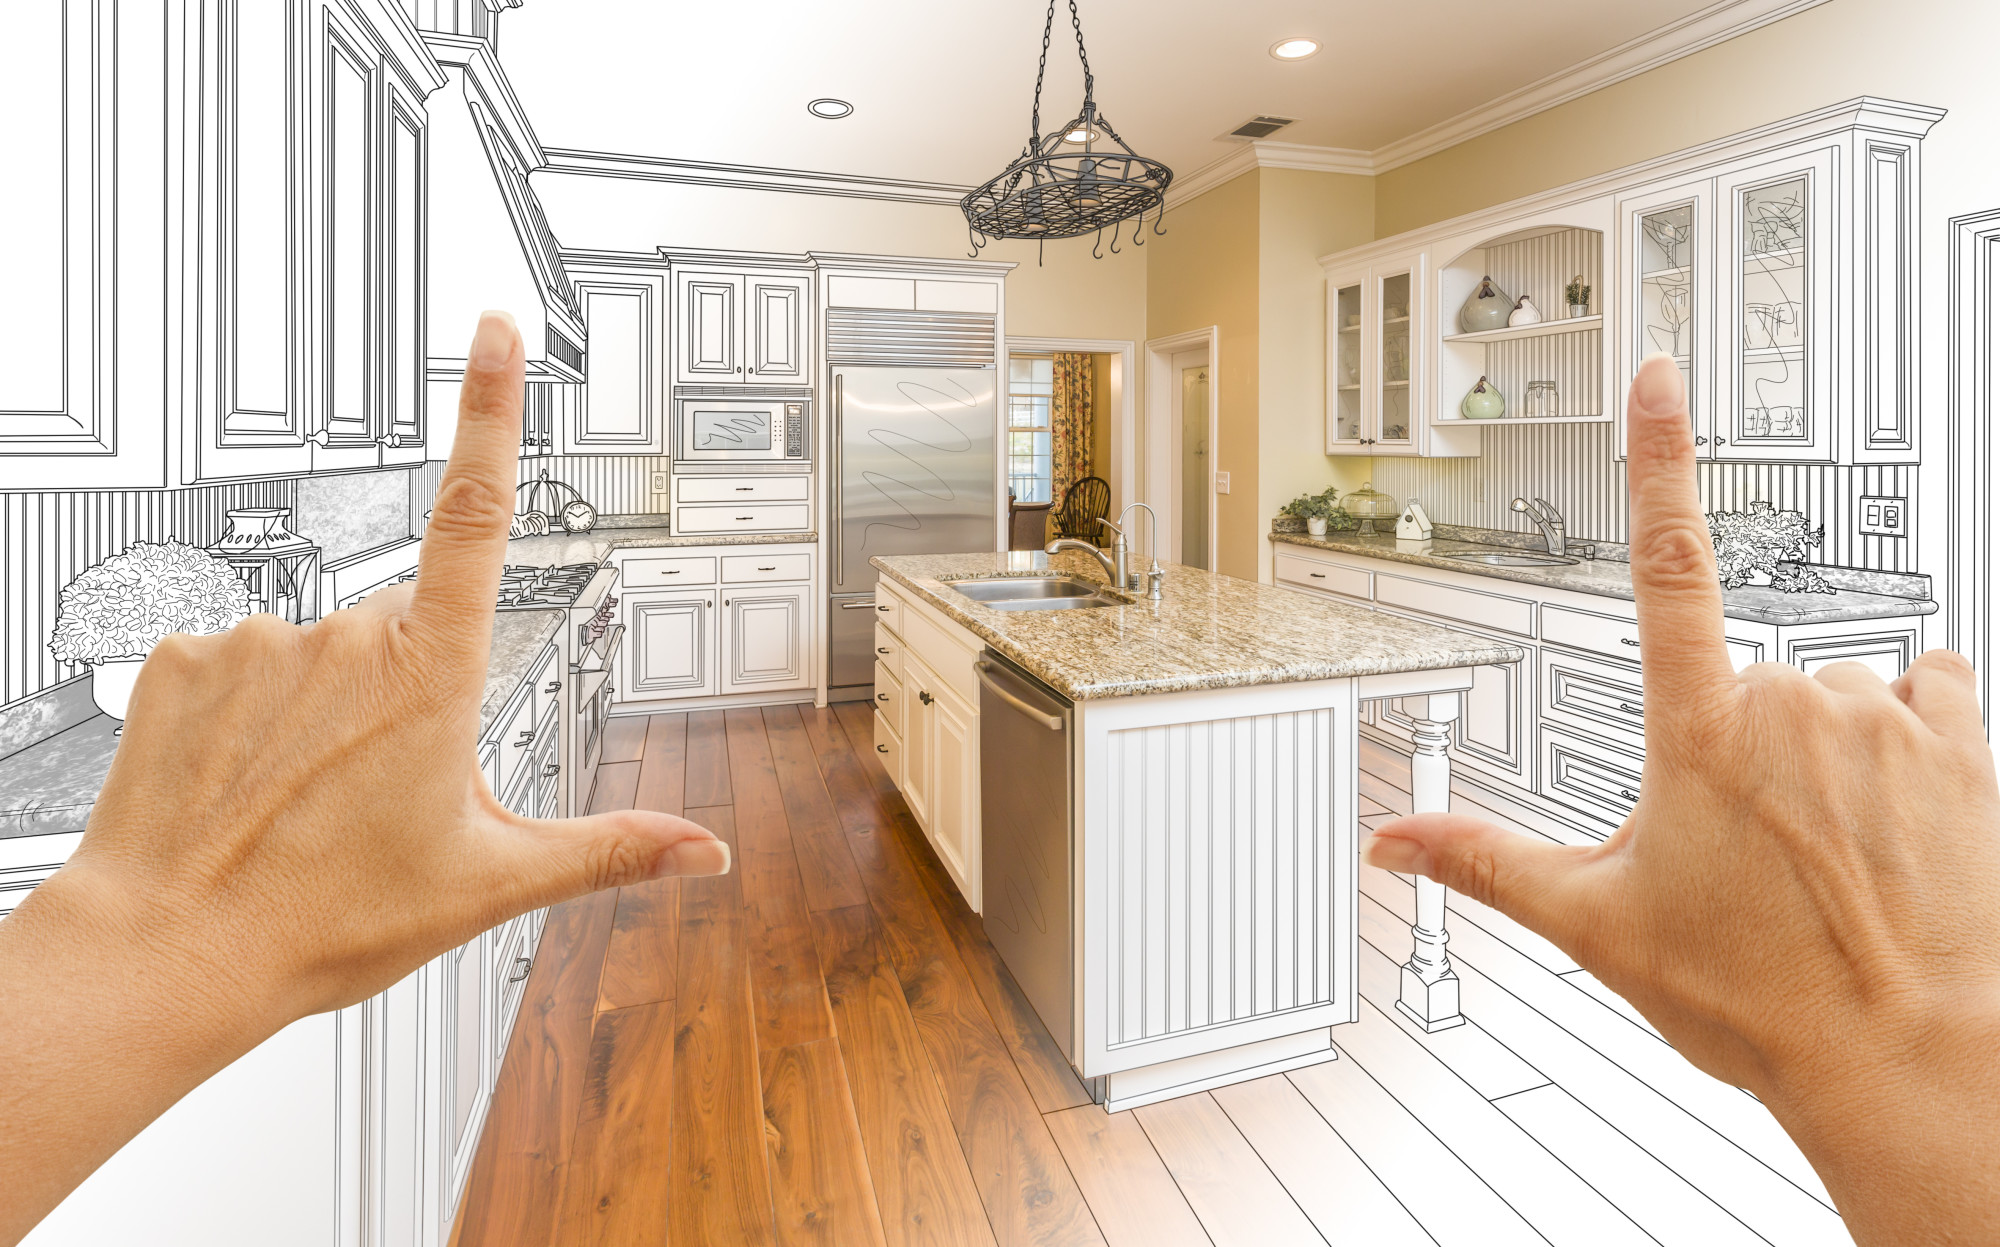 Are you planning home improvements and wondering what adds the most value to your home? See our guide to the top value adding home improvement projects today.